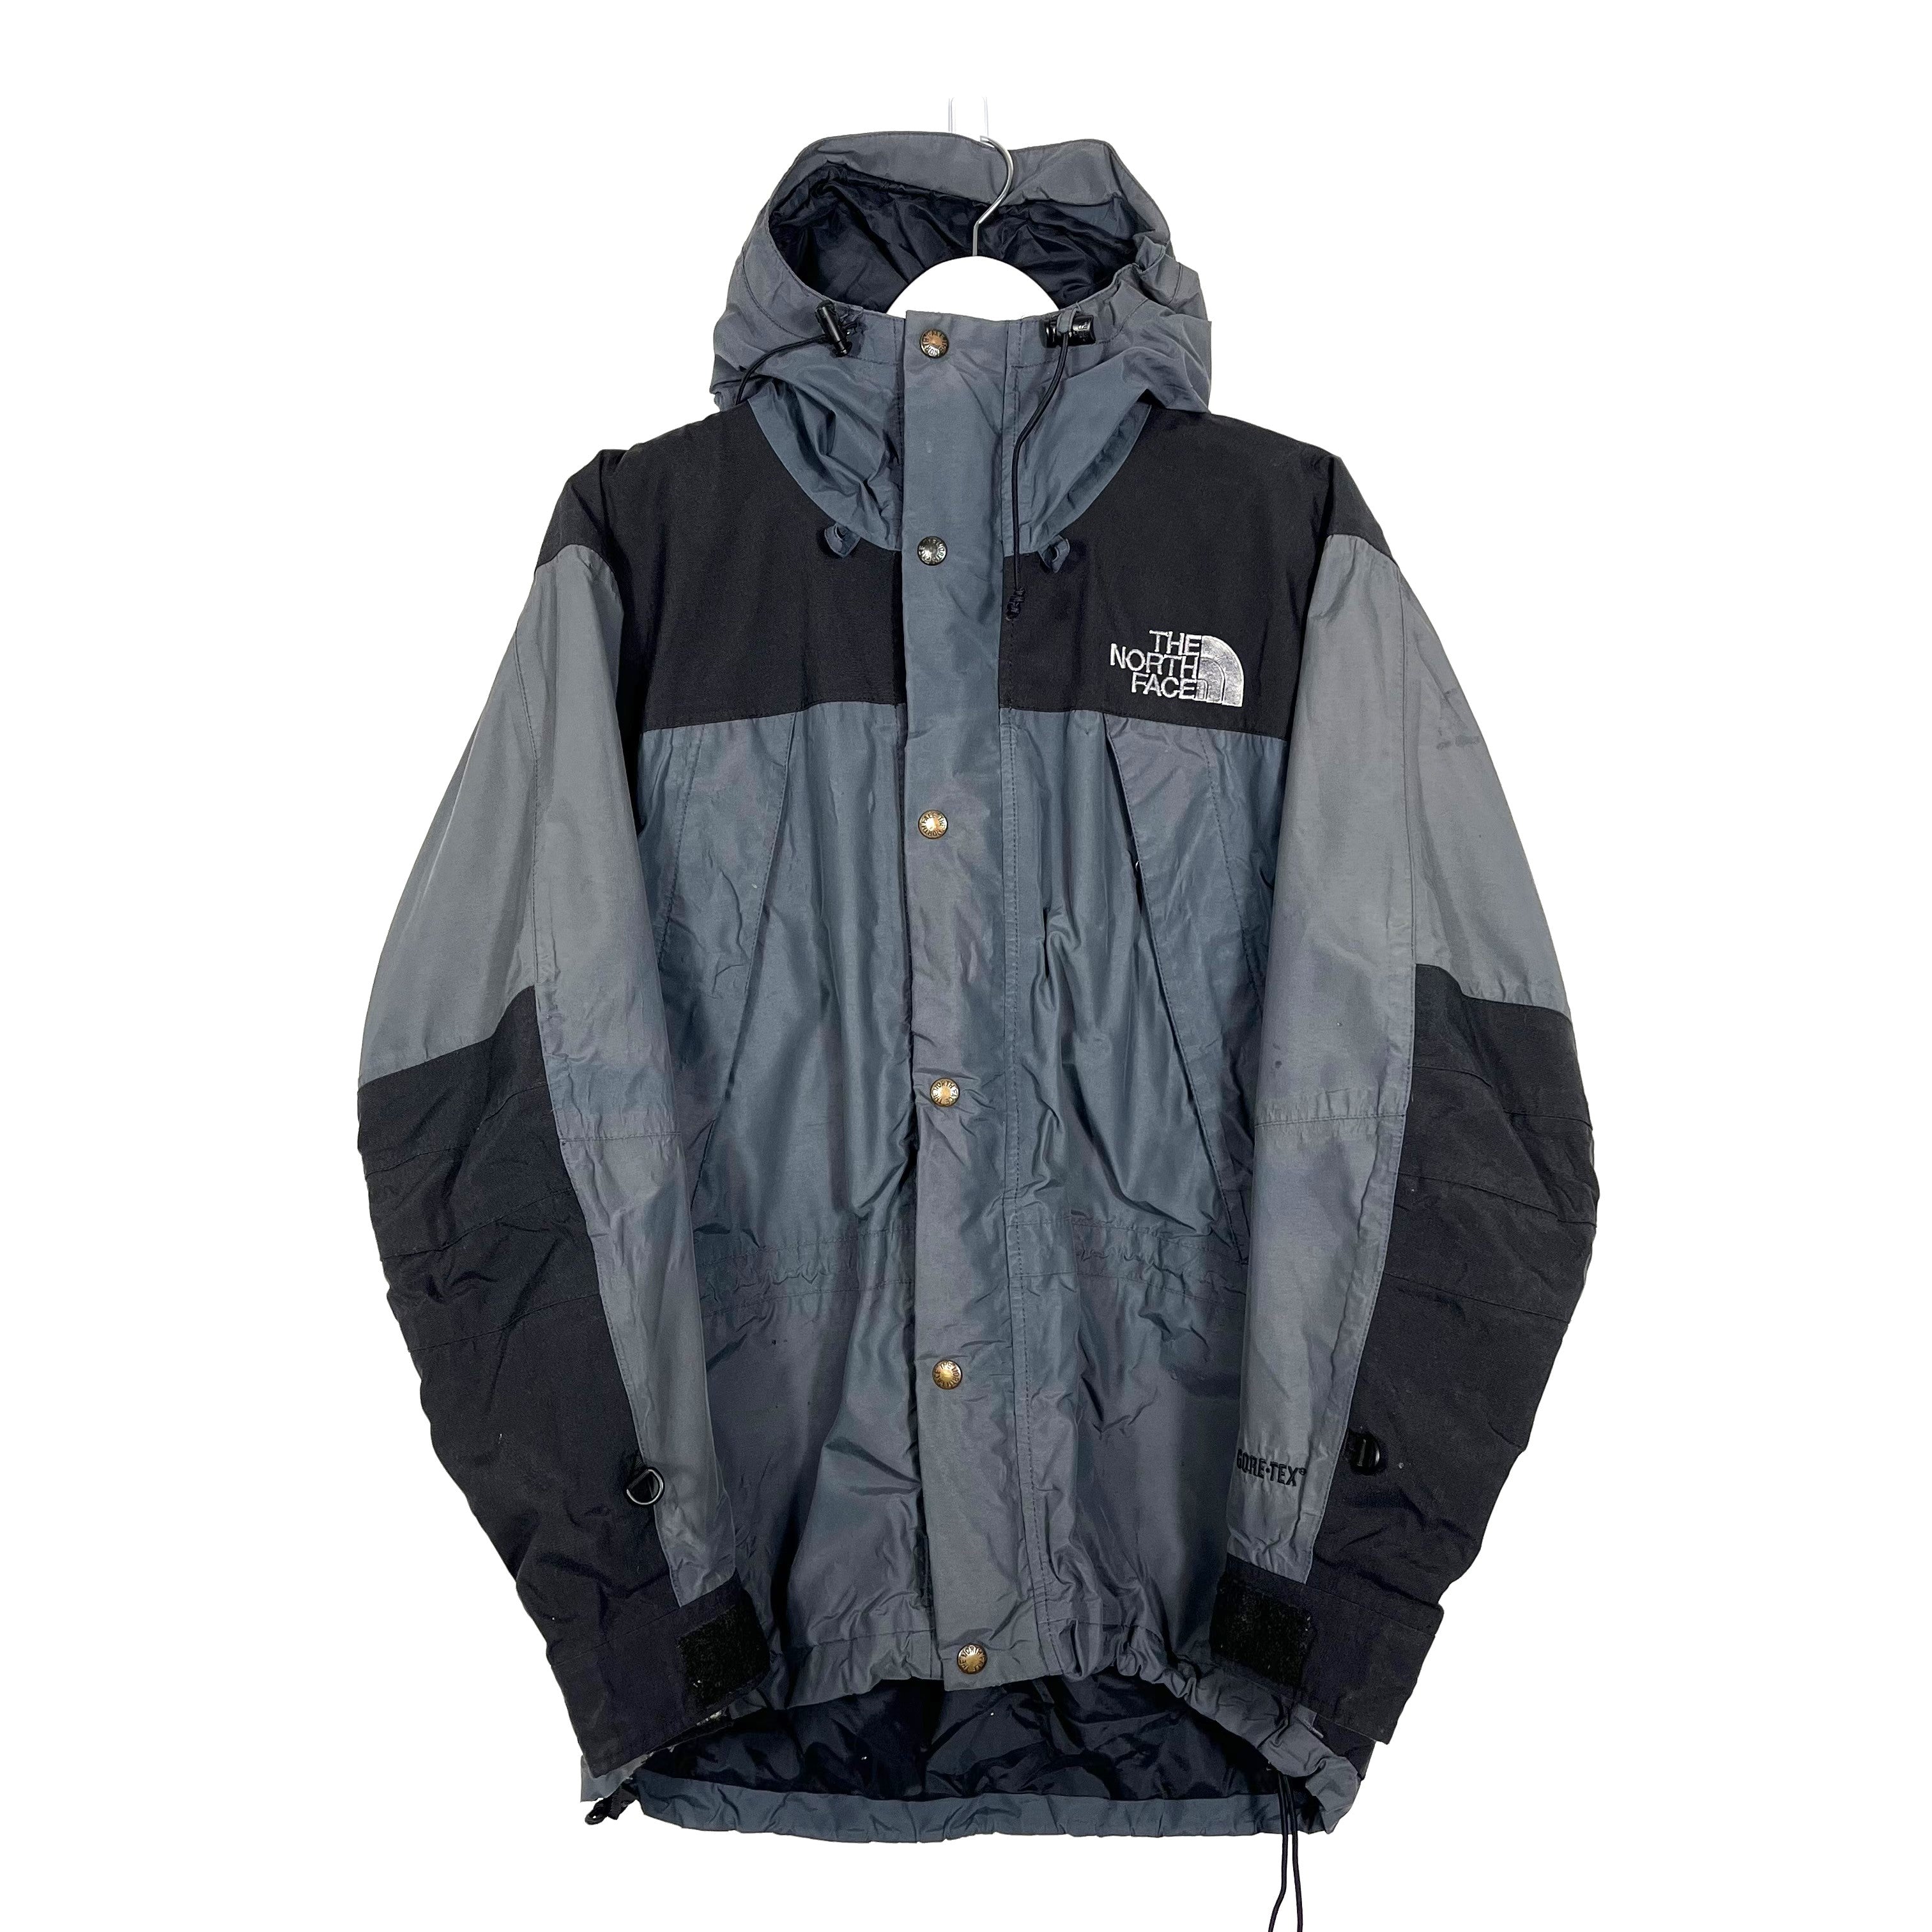 Vintage The North Face Gore Tex Lightweight Jacket - Men's Small